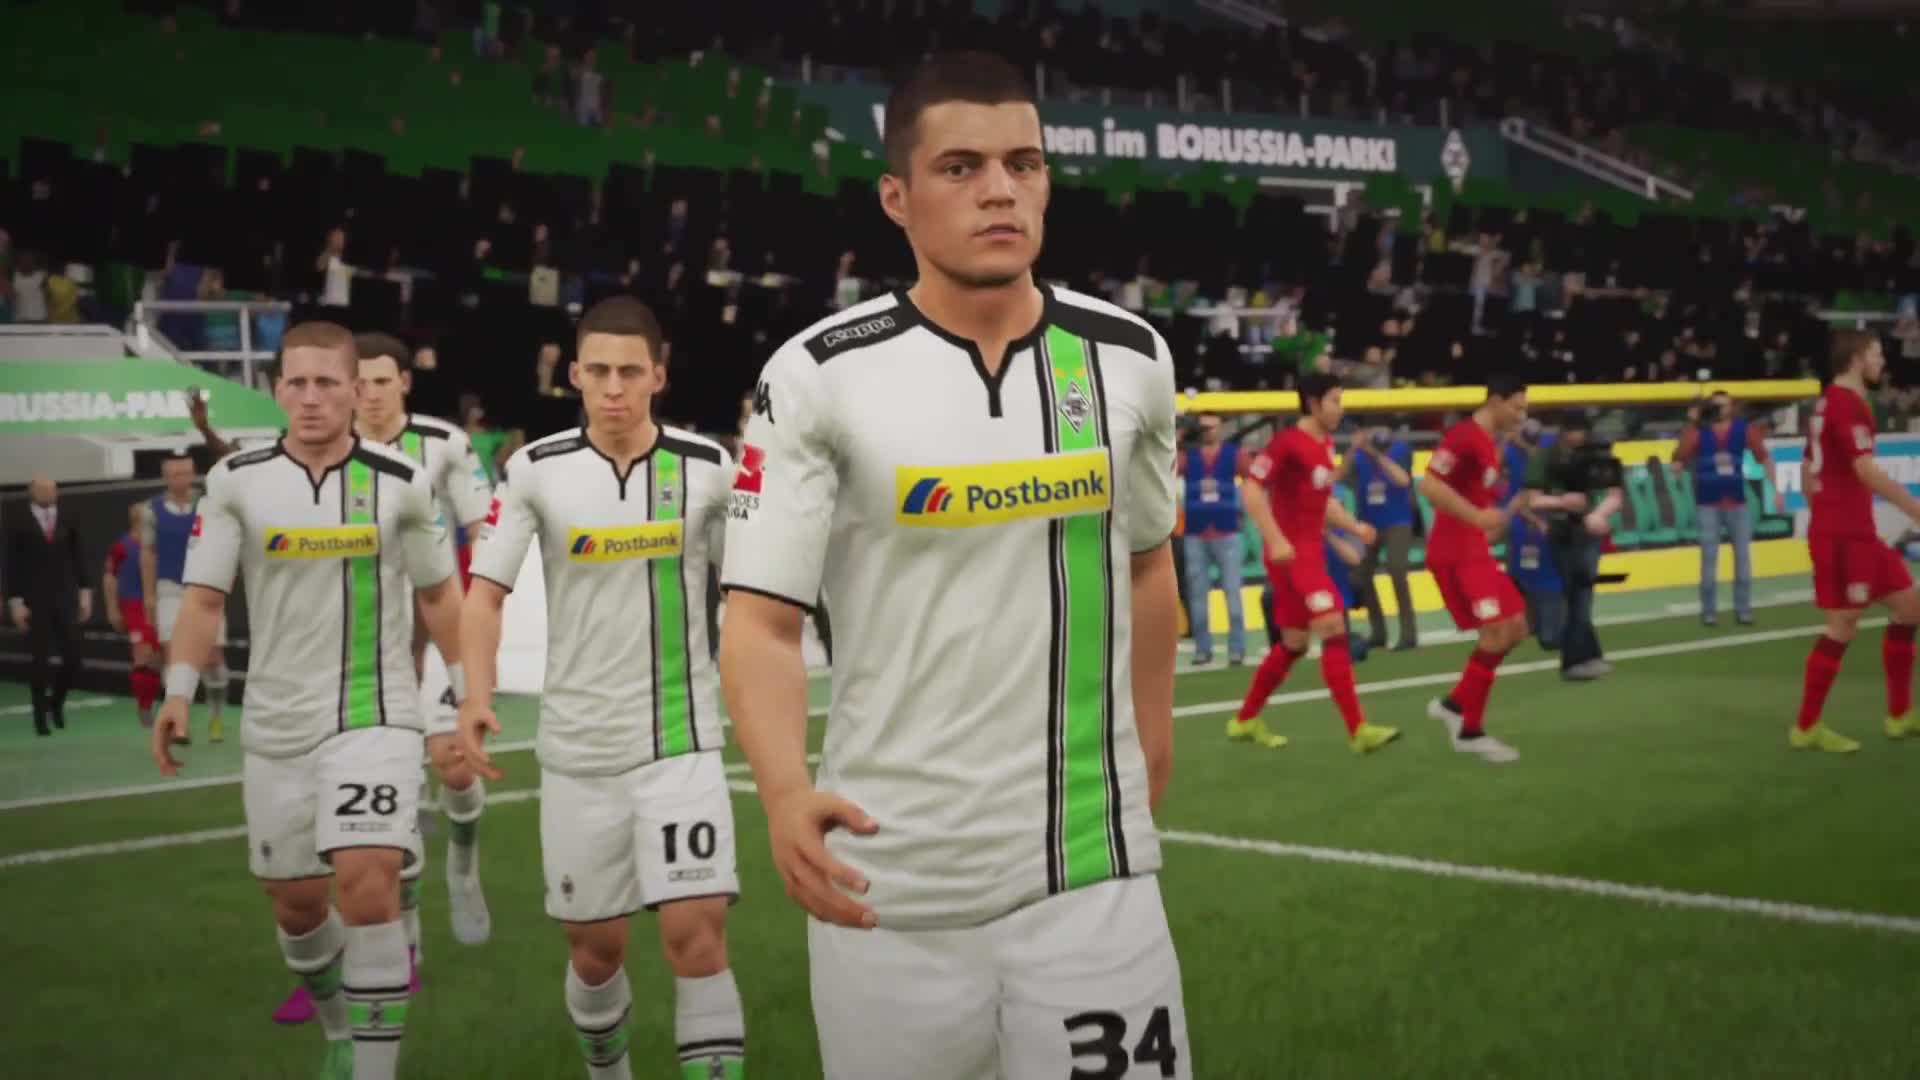 FIFA 16 - Sights and sounds